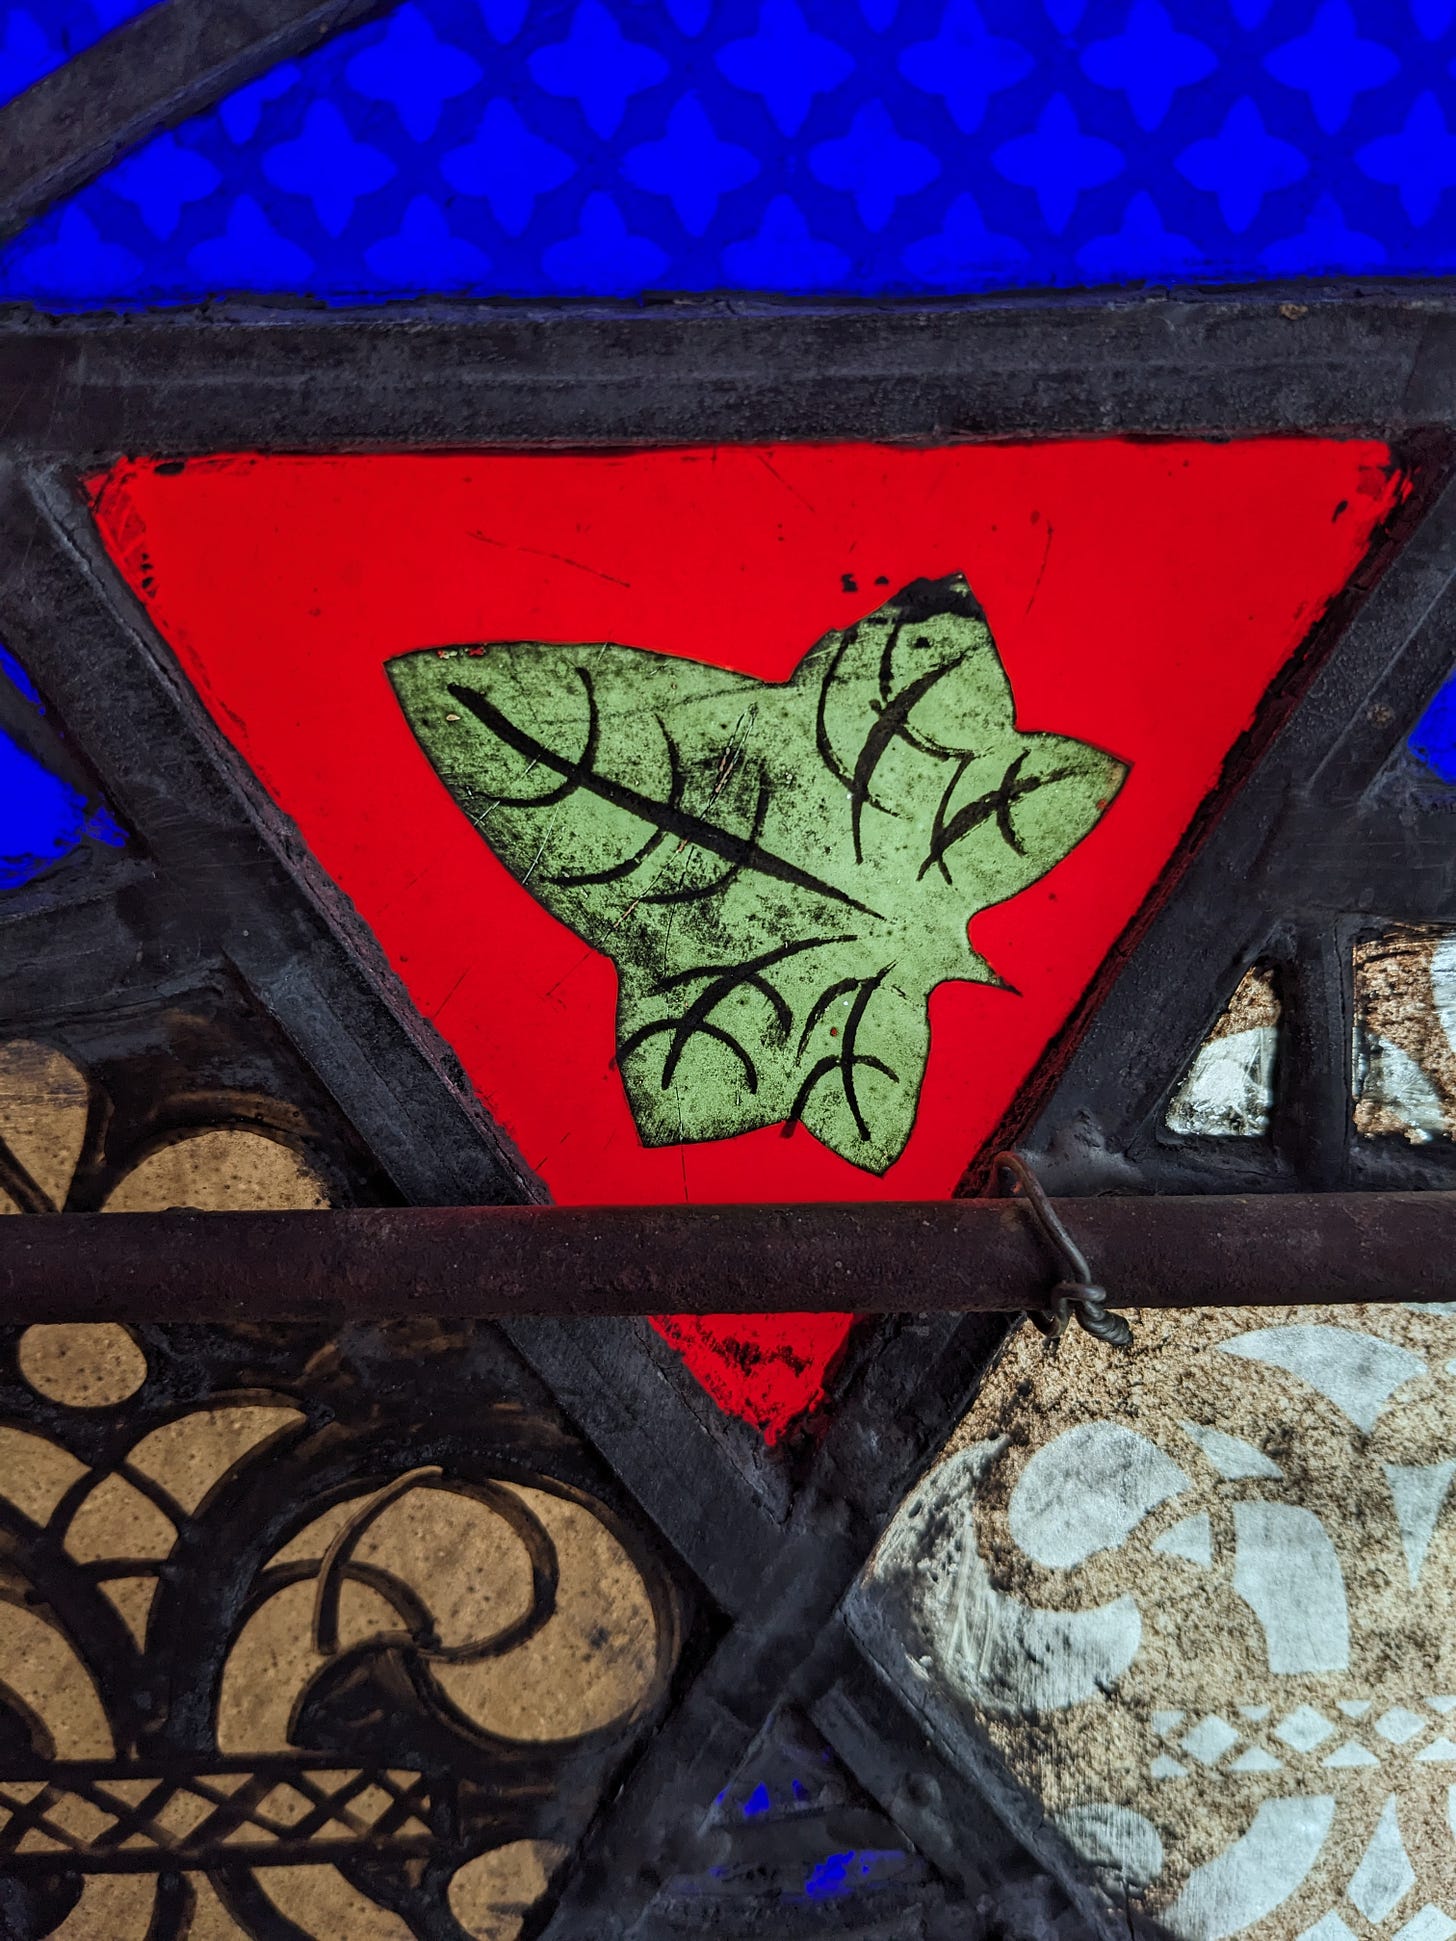 A collage of stained glass textures with a leaf in the center